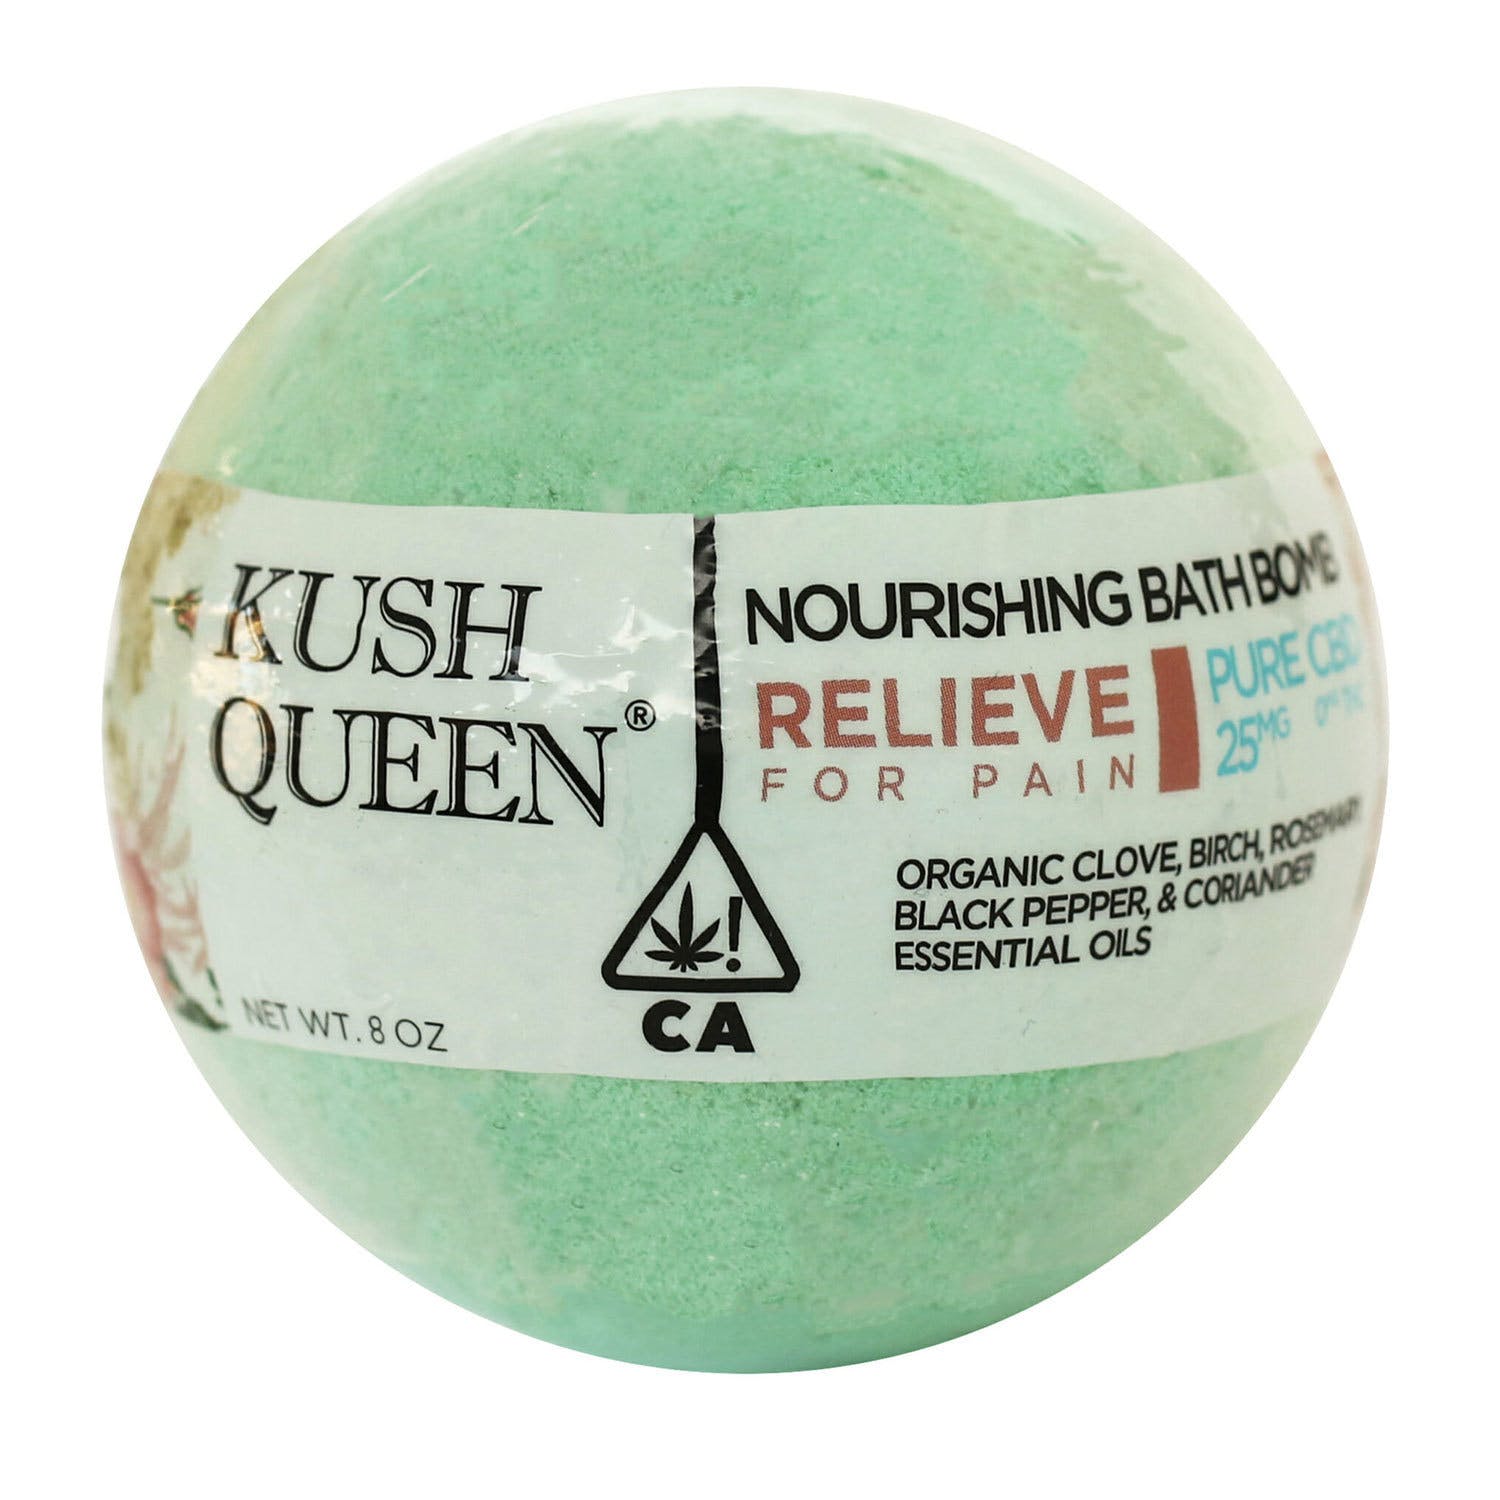 topicals-kush-queen-kush-queen-relieve-bath-bomb-pure-cbd-25mg